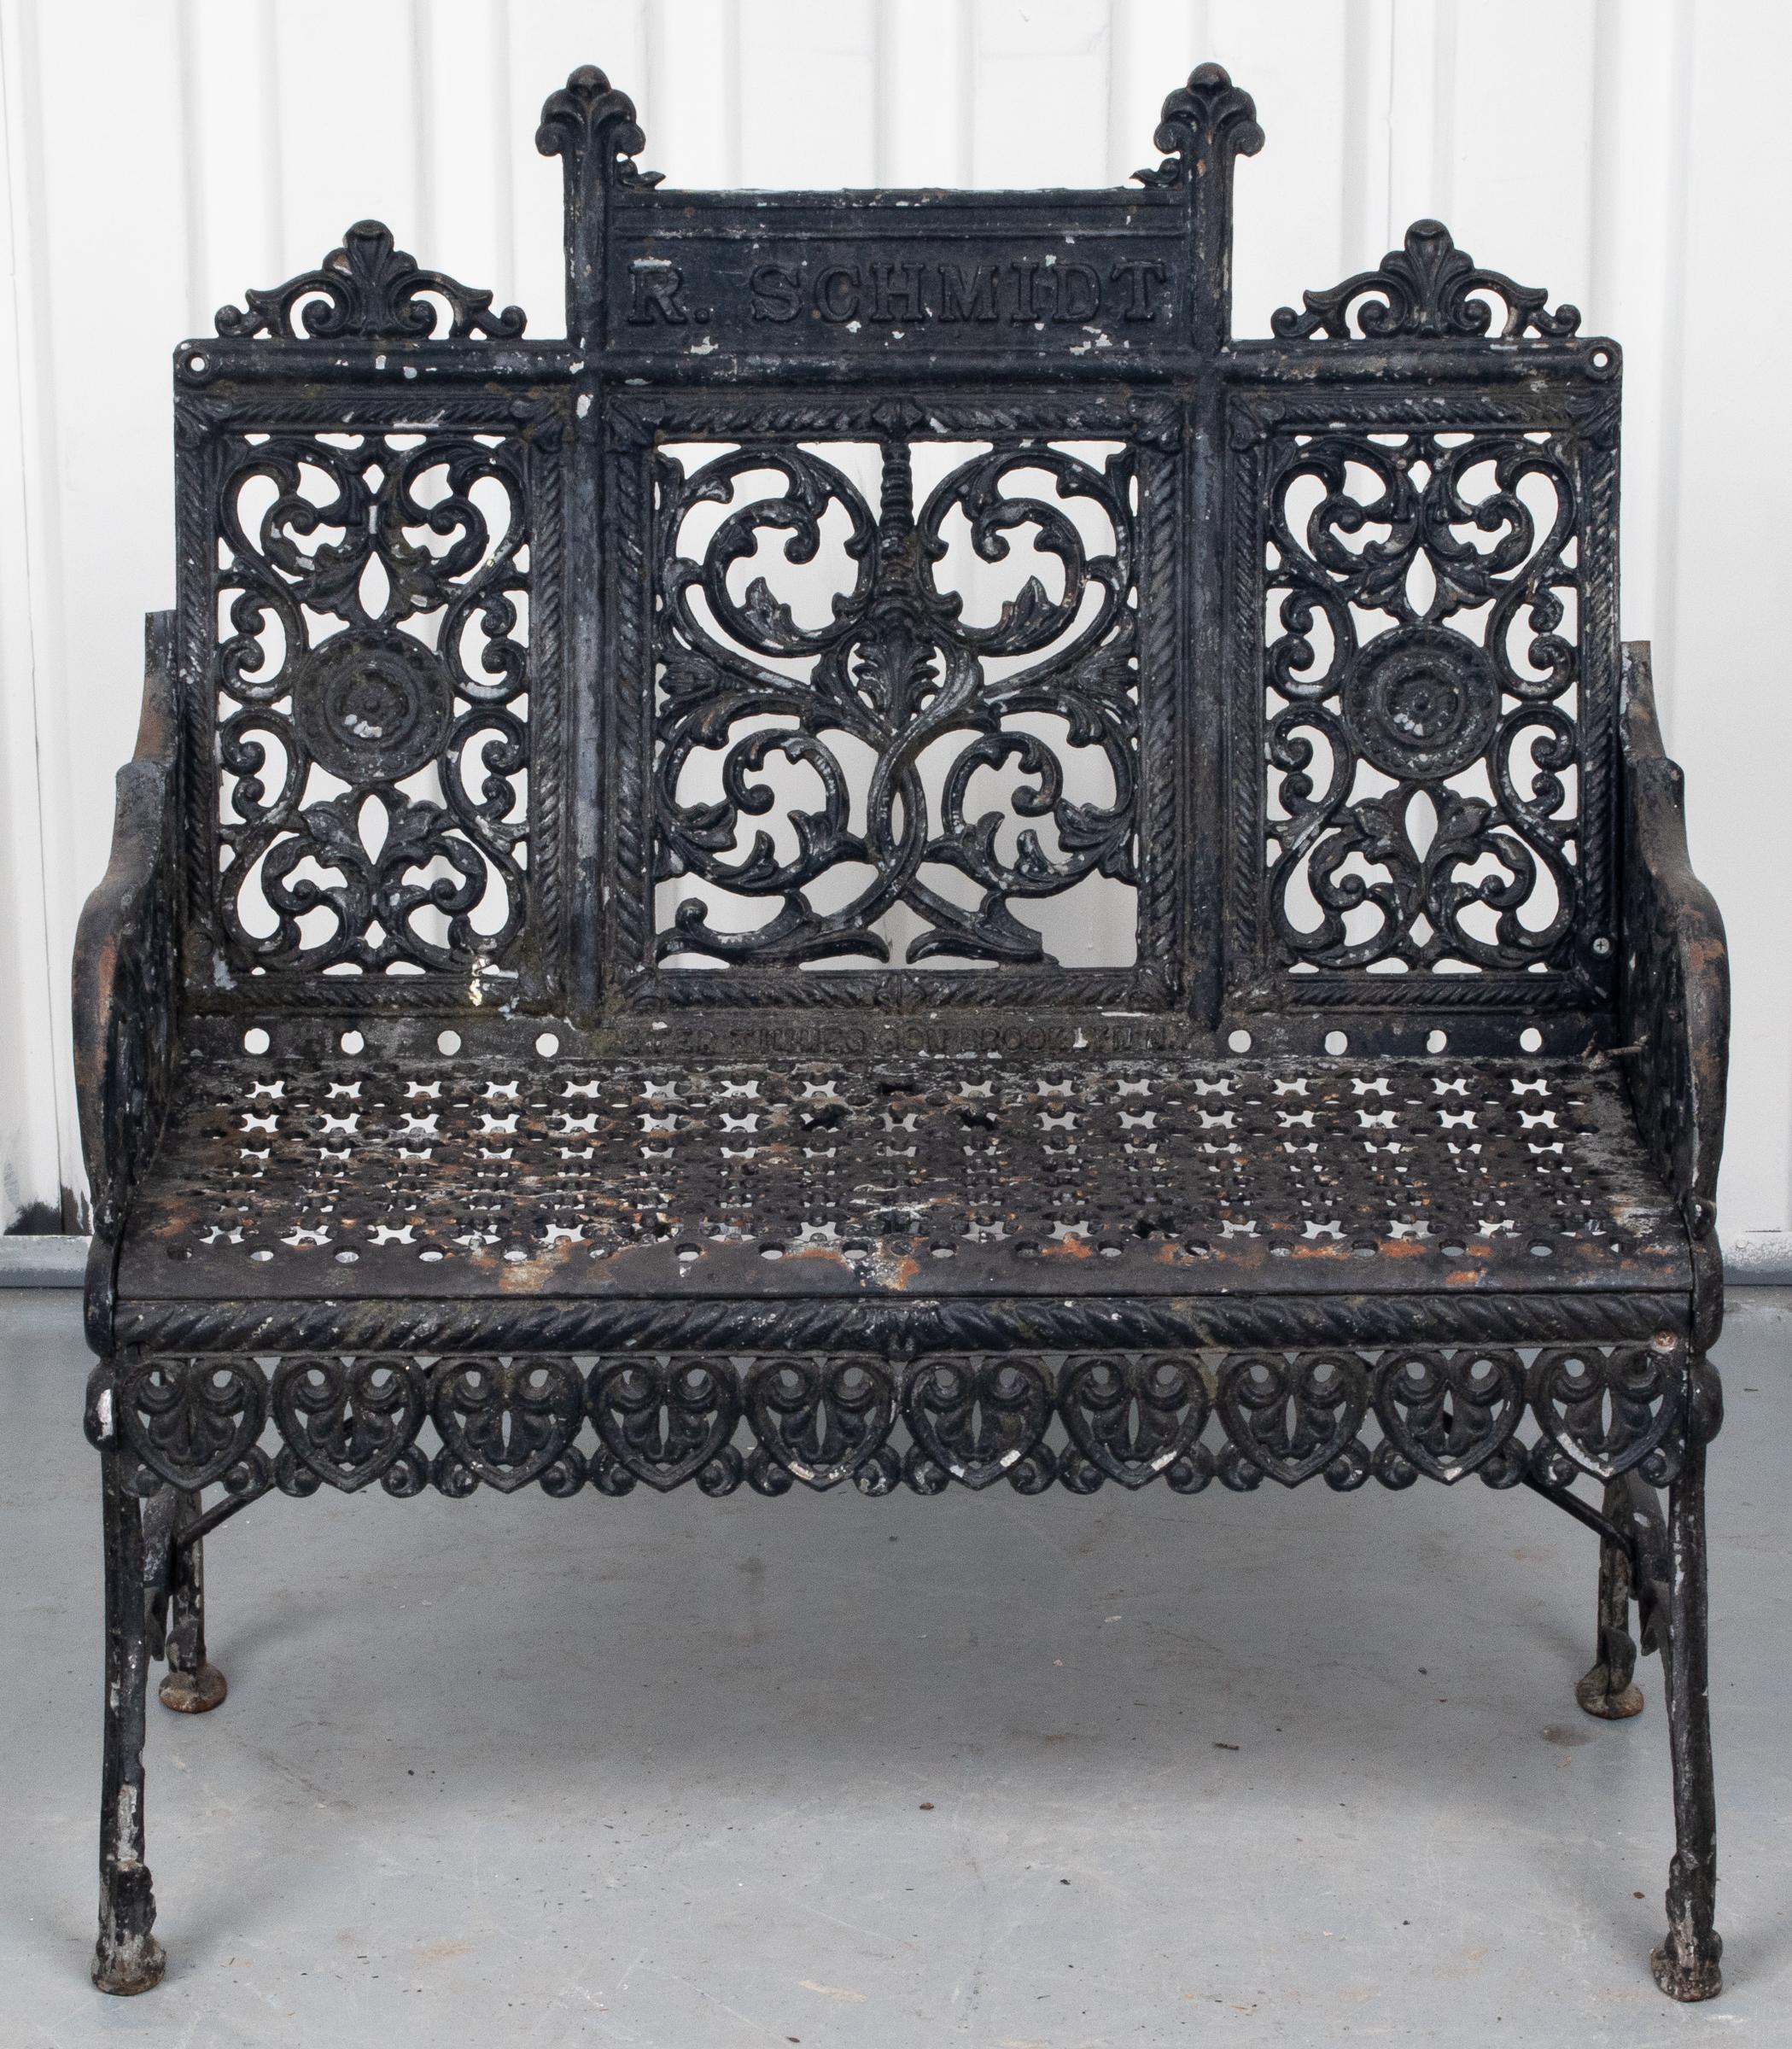 Gothic Revival cast iron garden bench, with black paint decoration and open work motifs, back rest stamped 